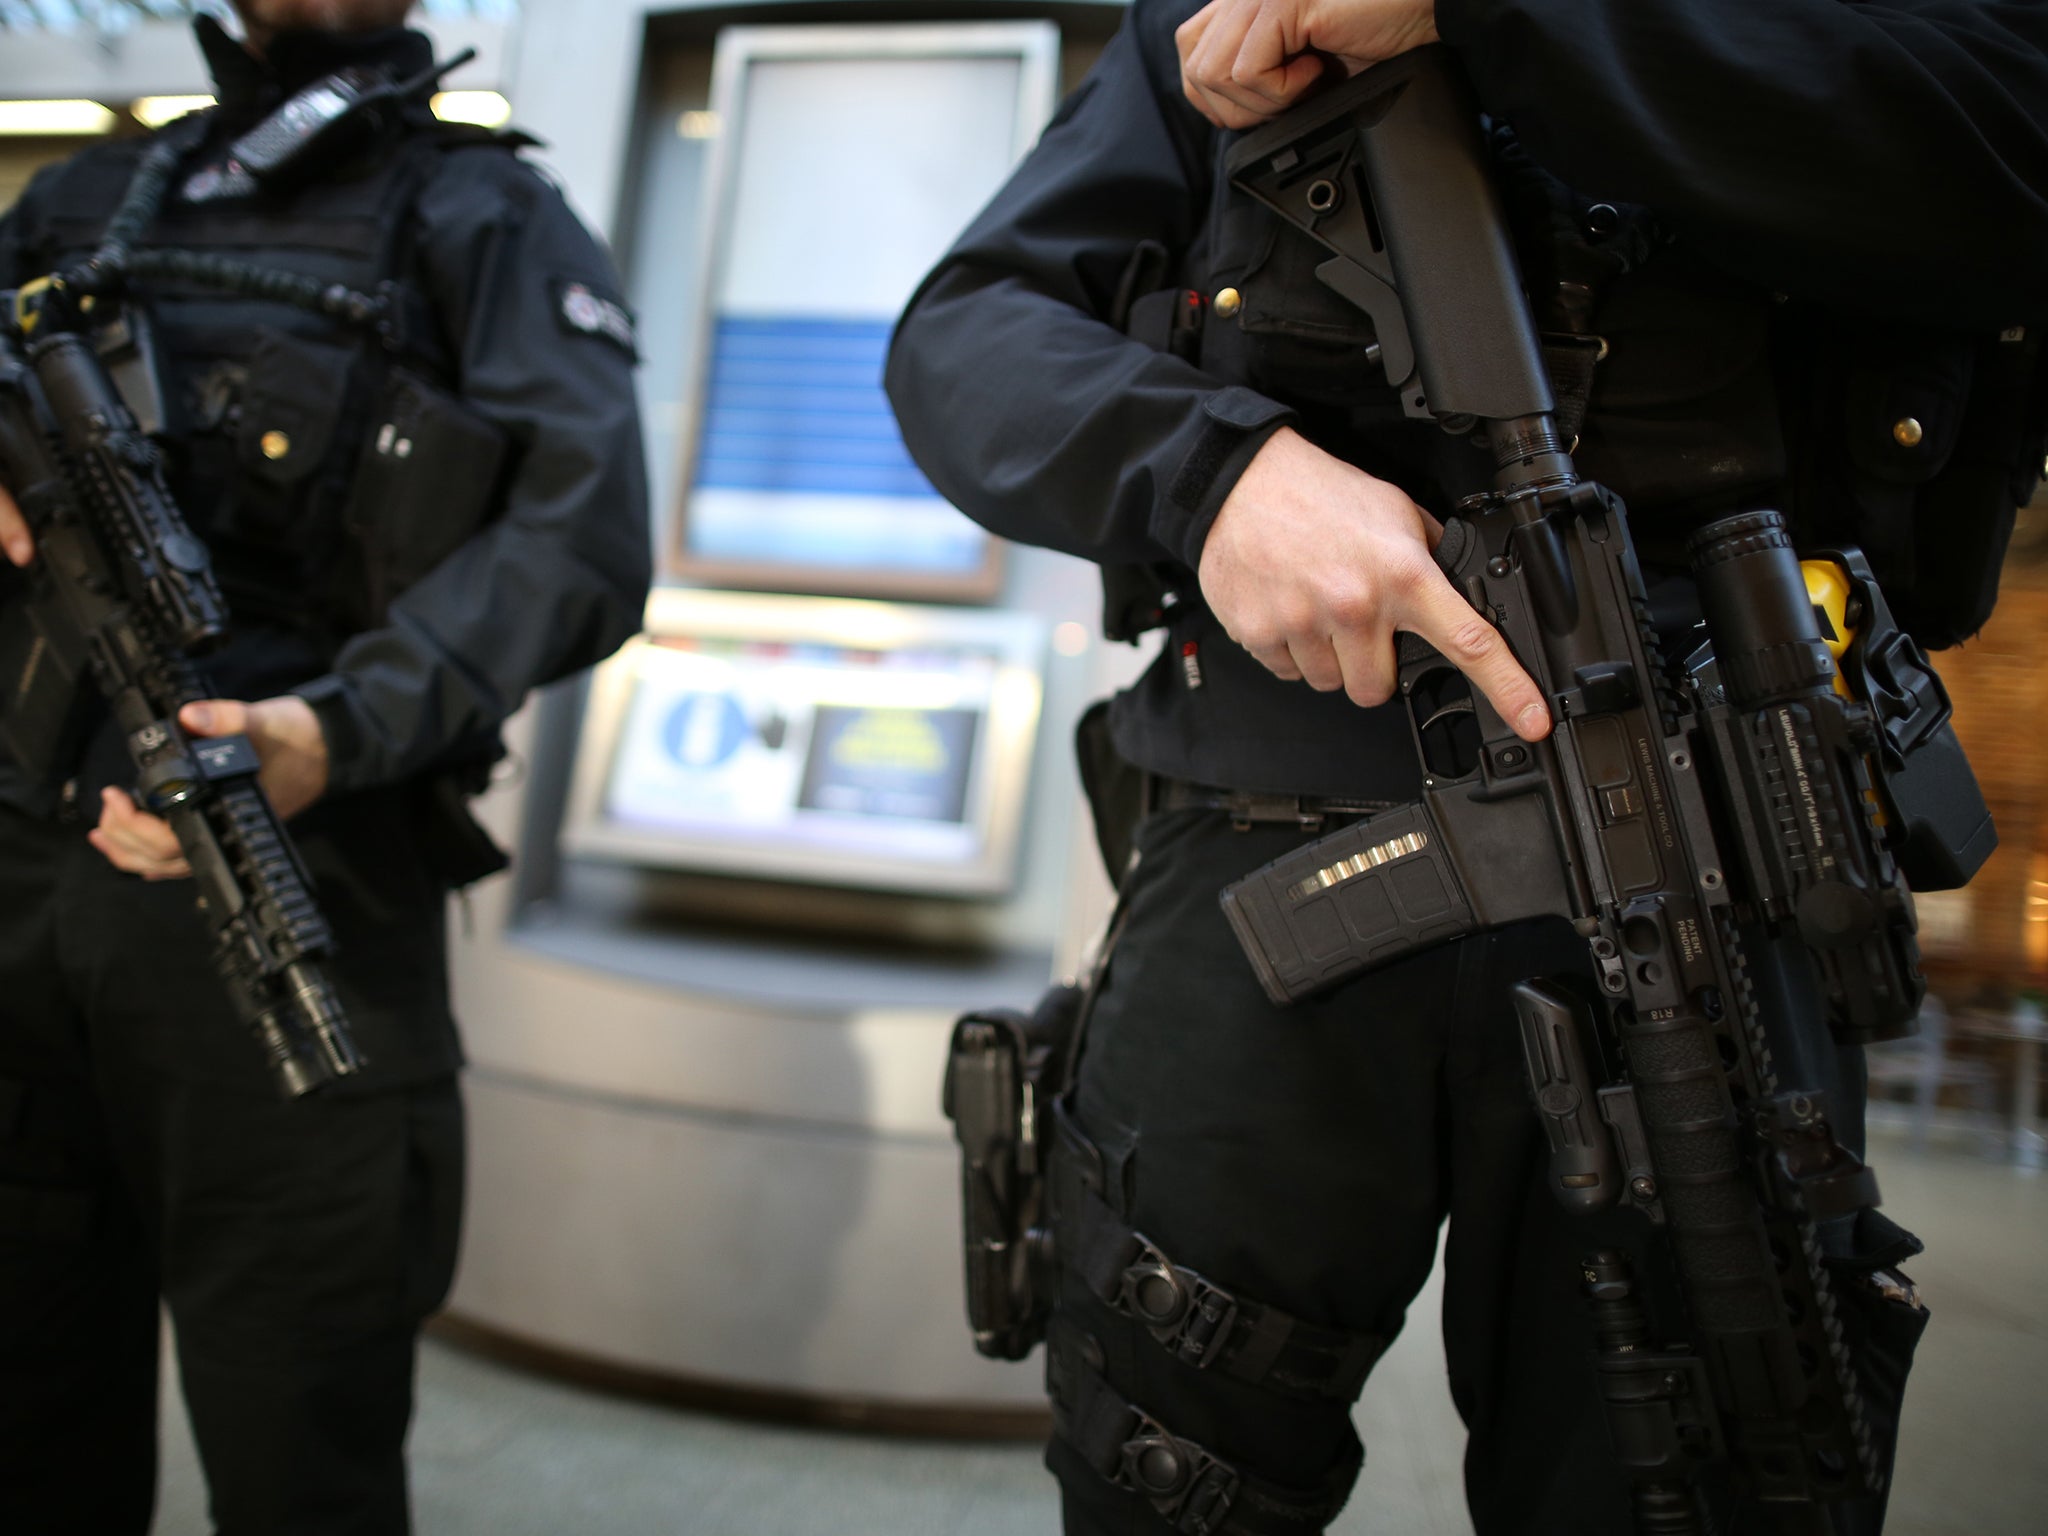 Counter Terror Police have thwarted a number of possible terror attacks in recent years